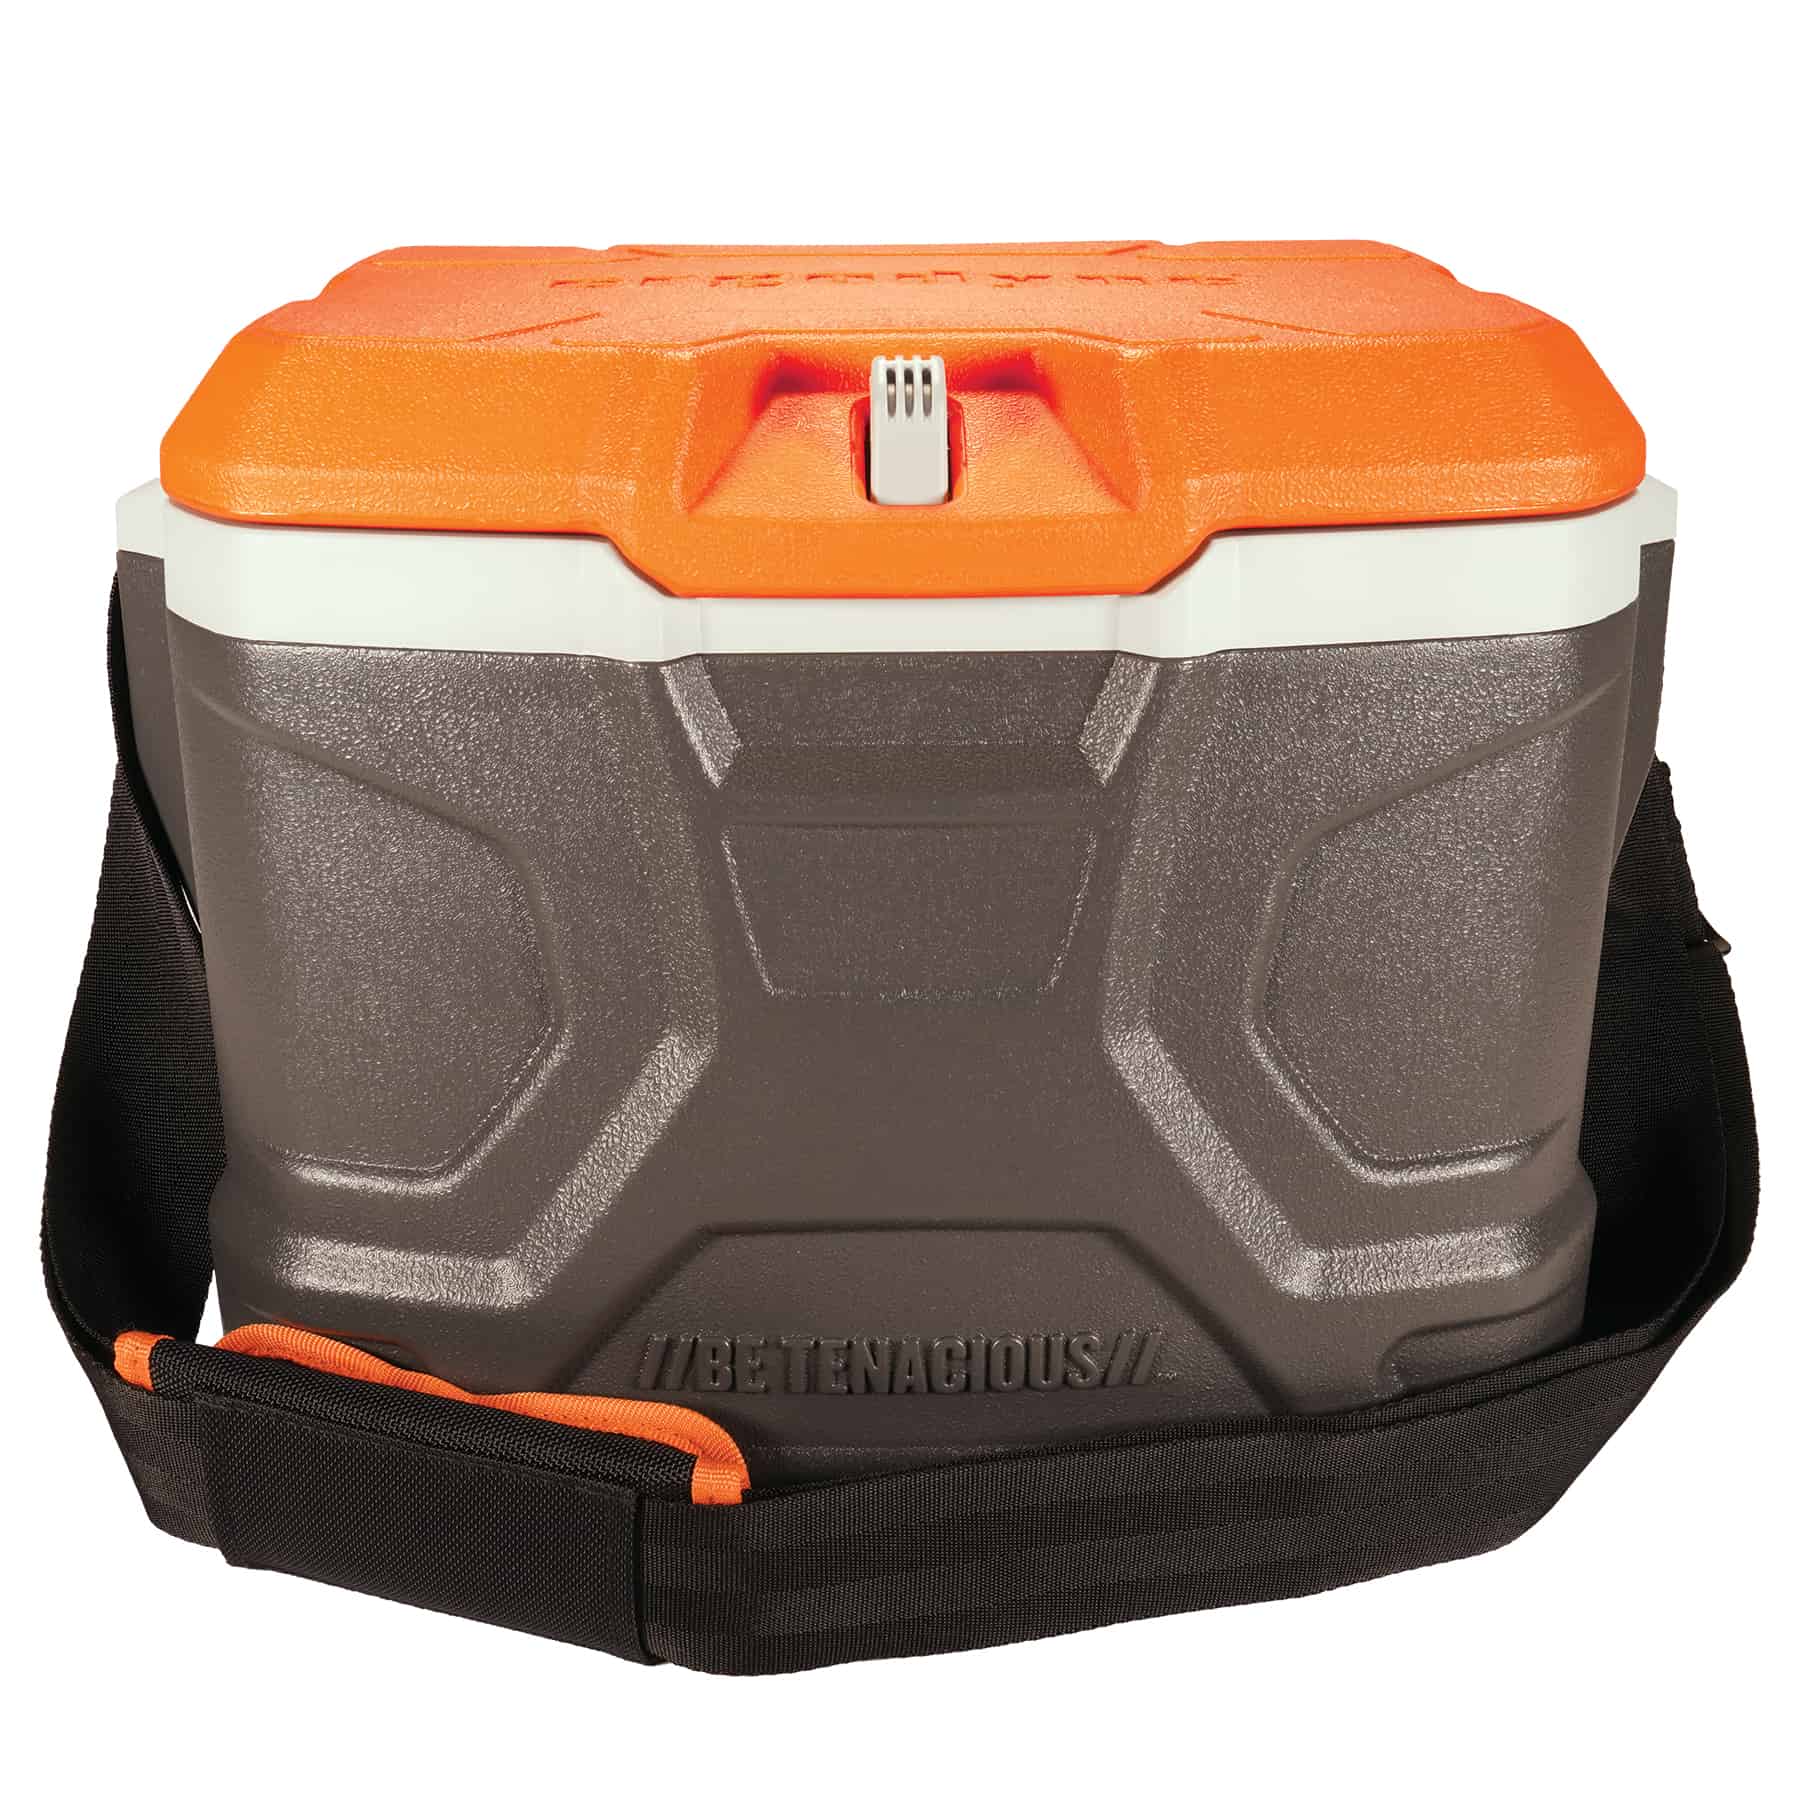 Ergodyne Chill-Its 5170 17-Quart Industrial Hard-Sided Cooler from GME Supply